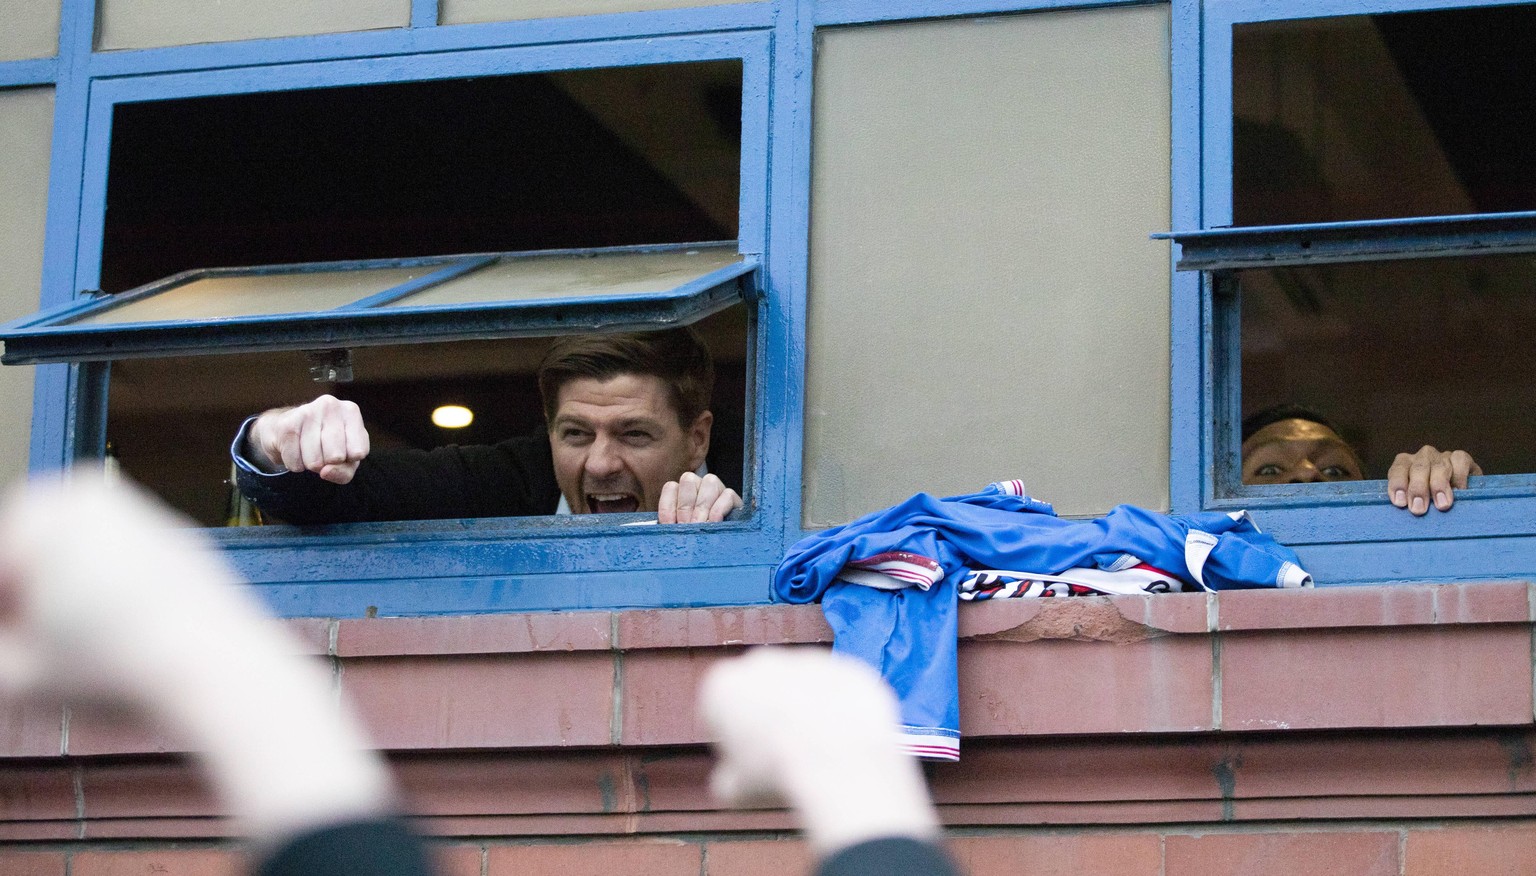 Rangers v St Mirren - Scottish Premiership - Ibrox Stadium Rangers manager Steven Gerrard and Alfredo Morelos right hang out the window of the dressing room to cheer with fans gathered outside the sta ...